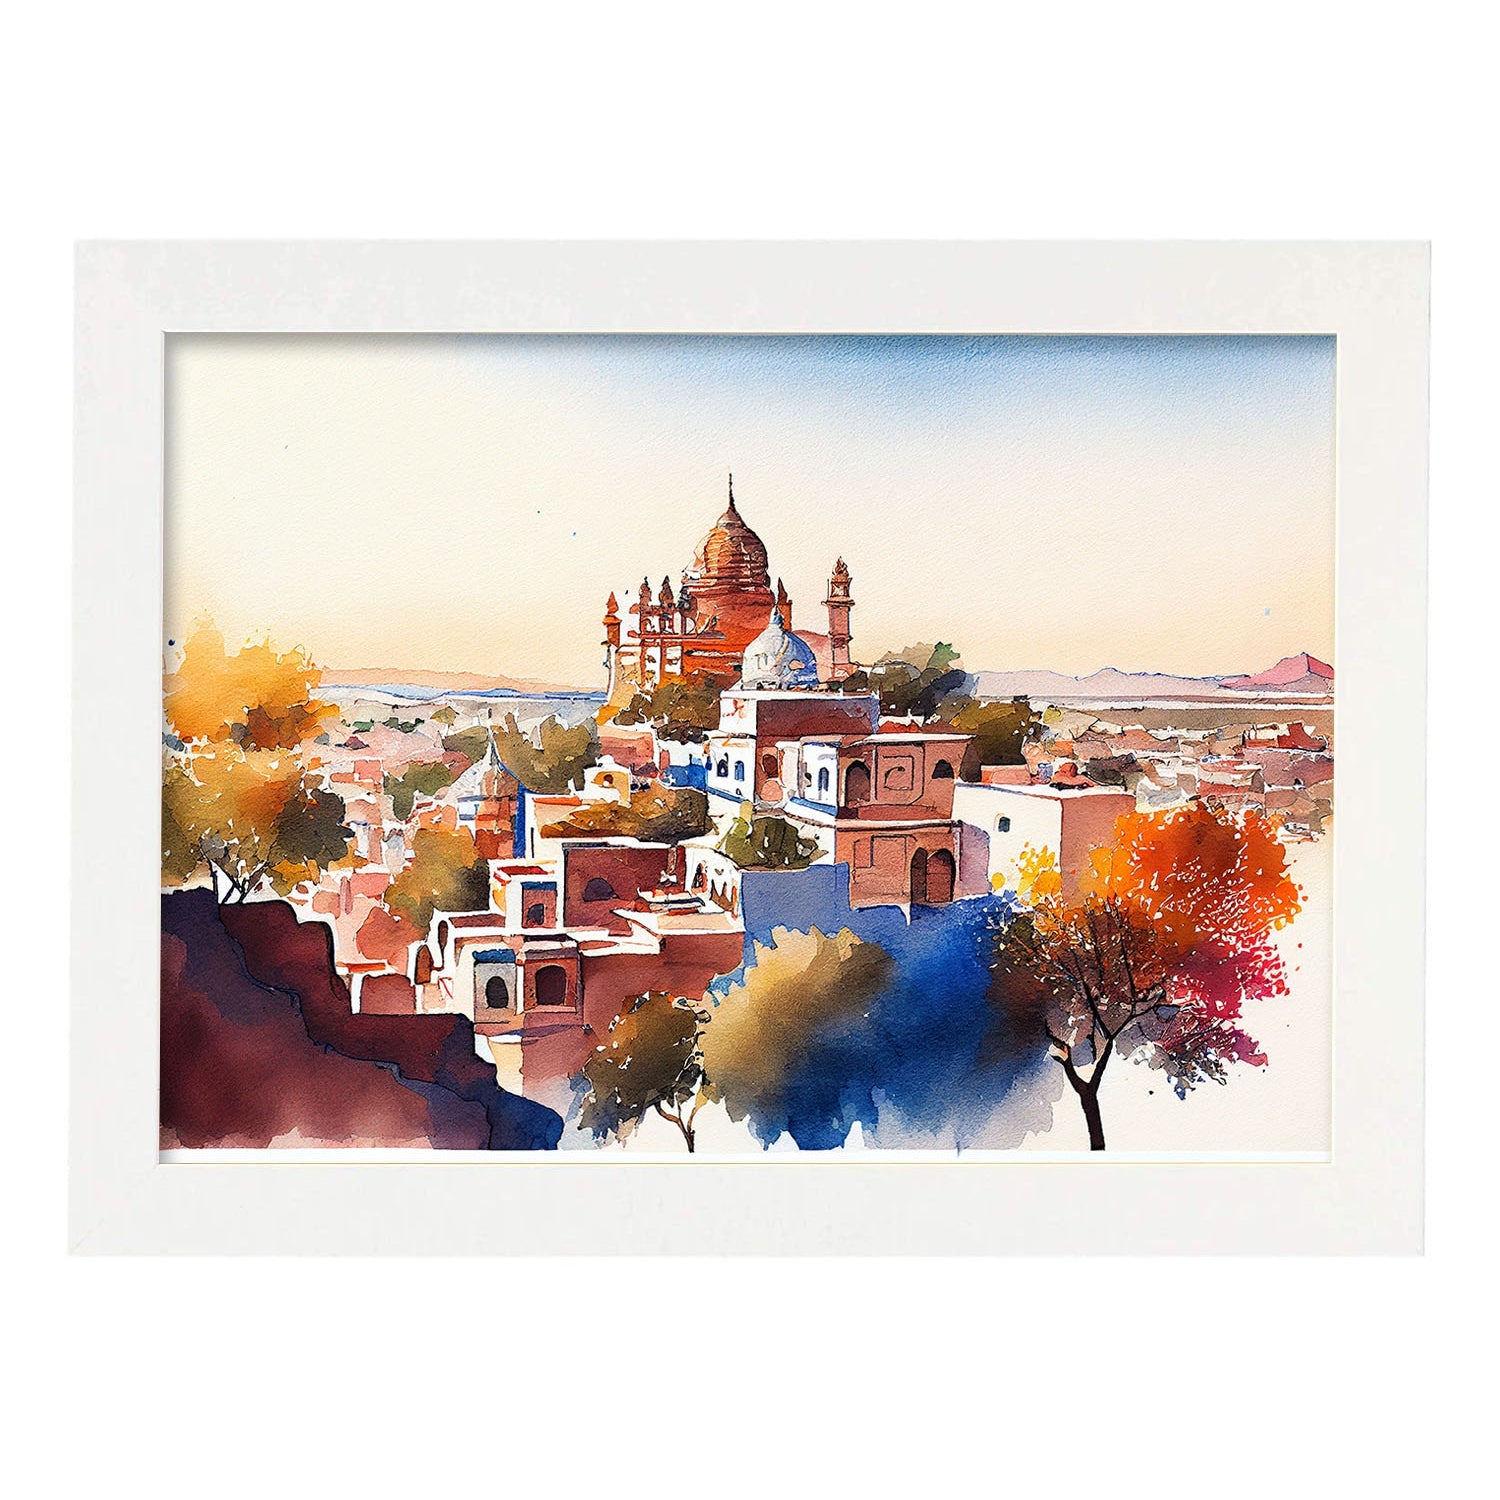 Nacnic watercolor of a skyline of the city of Jodhpur. Aesthetic Wall Art Prints for Bedroom or Living Room Design.-Artwork-Nacnic-A4-Marco Blanco-Nacnic Estudio SL